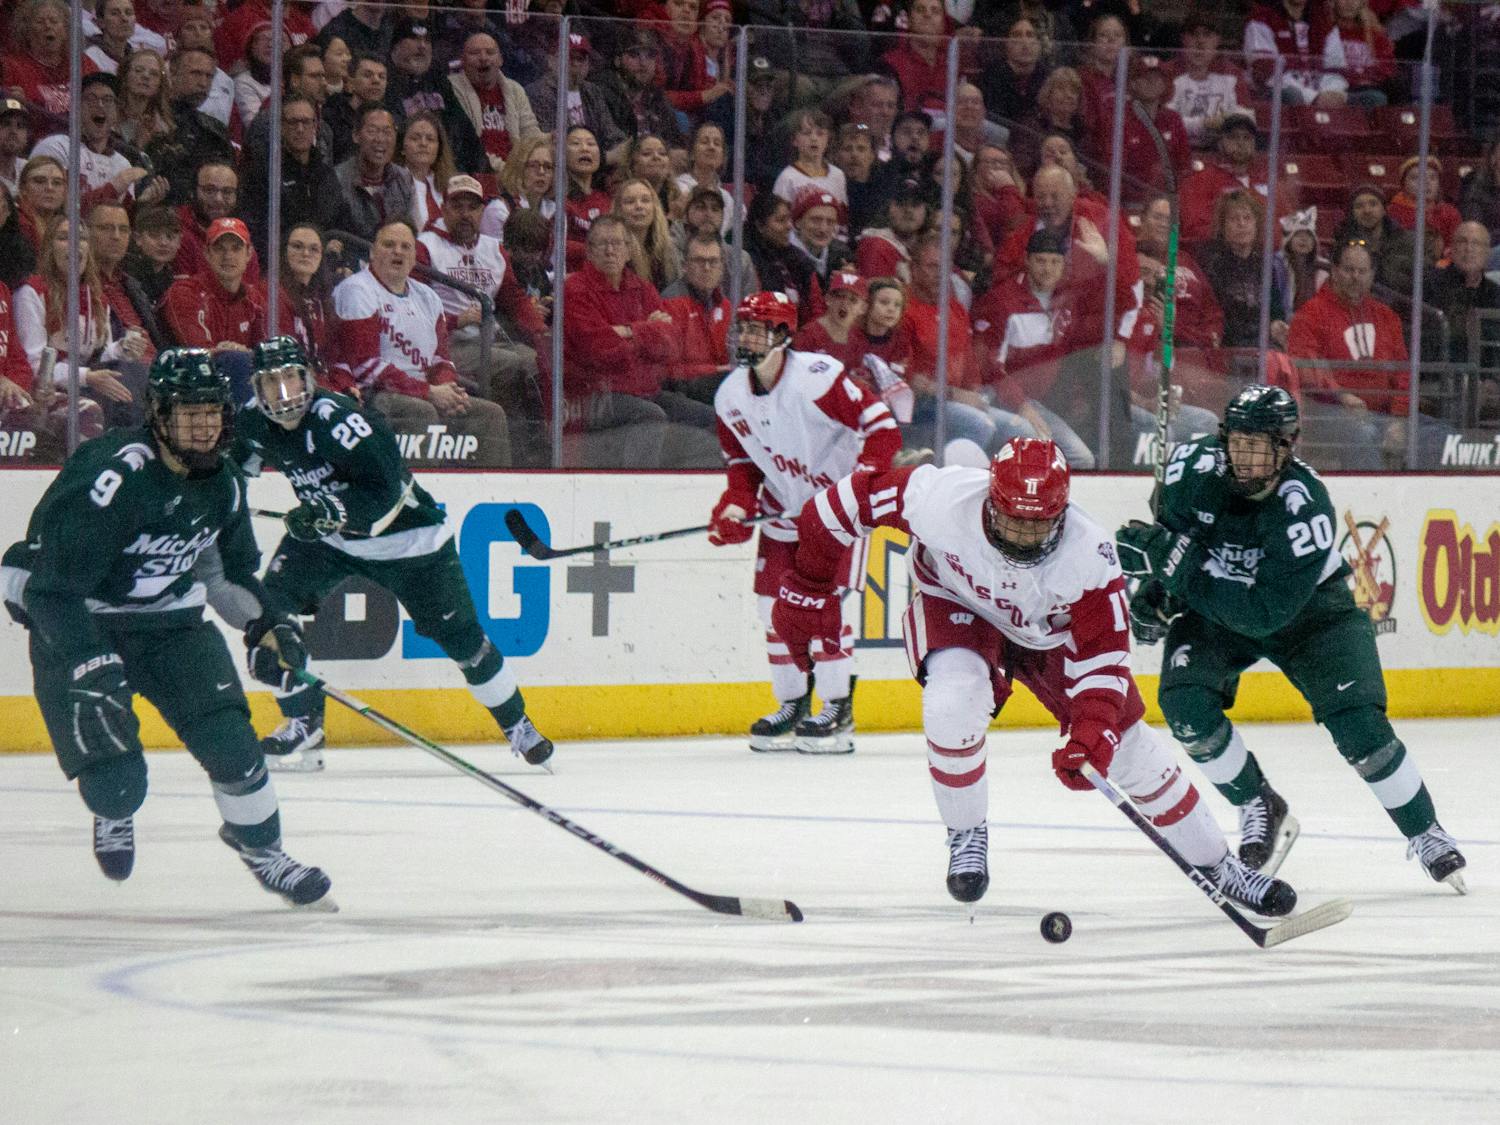 PHOTOS: Badgers defeated by Michigan State Spartans 5-2